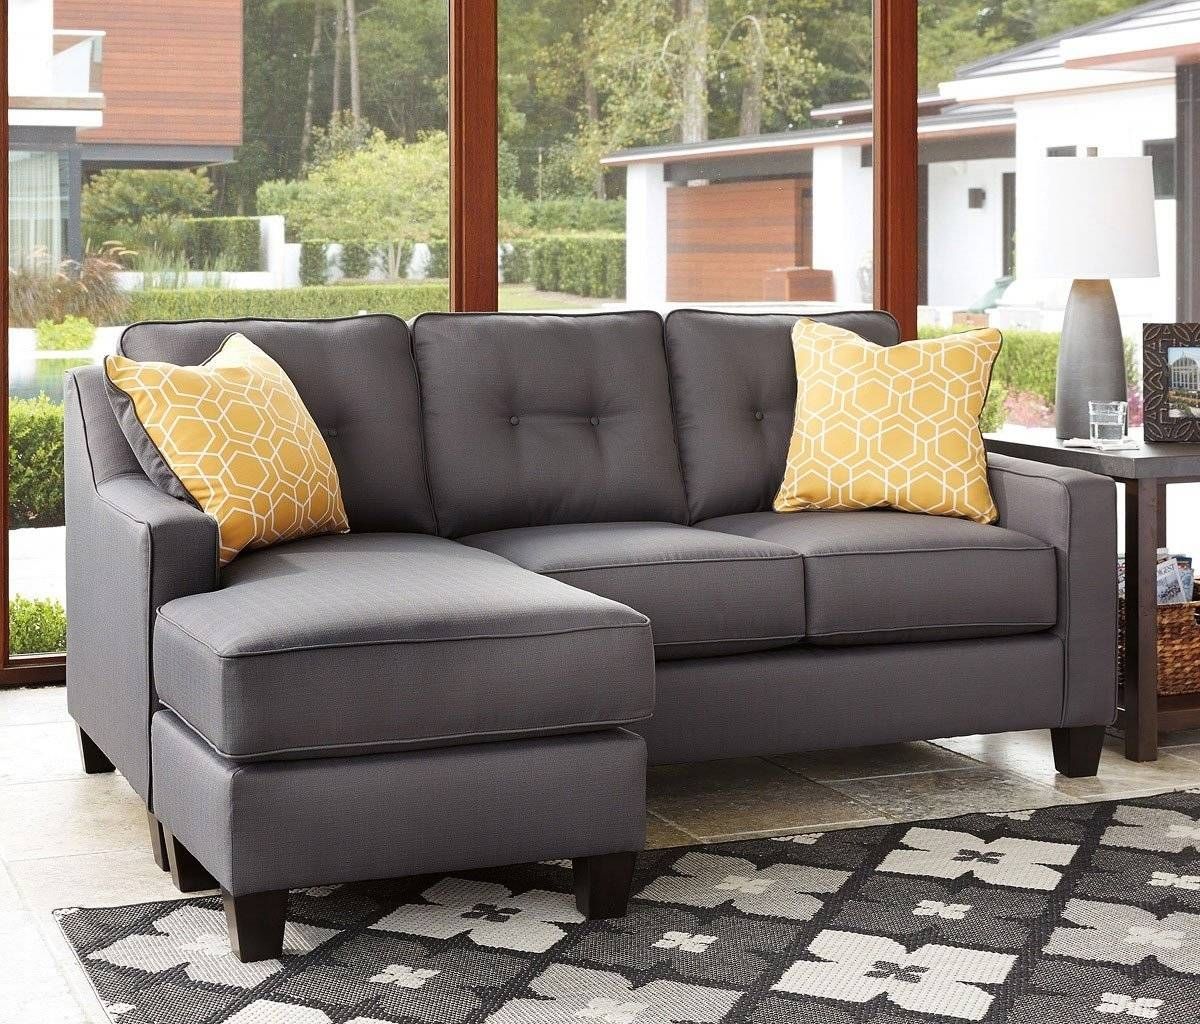 Aldie Nuvella Gray Sofa Chaise – Sofas – Living Room Furniture Pertaining To Gray Sofas (View 11 of 15)